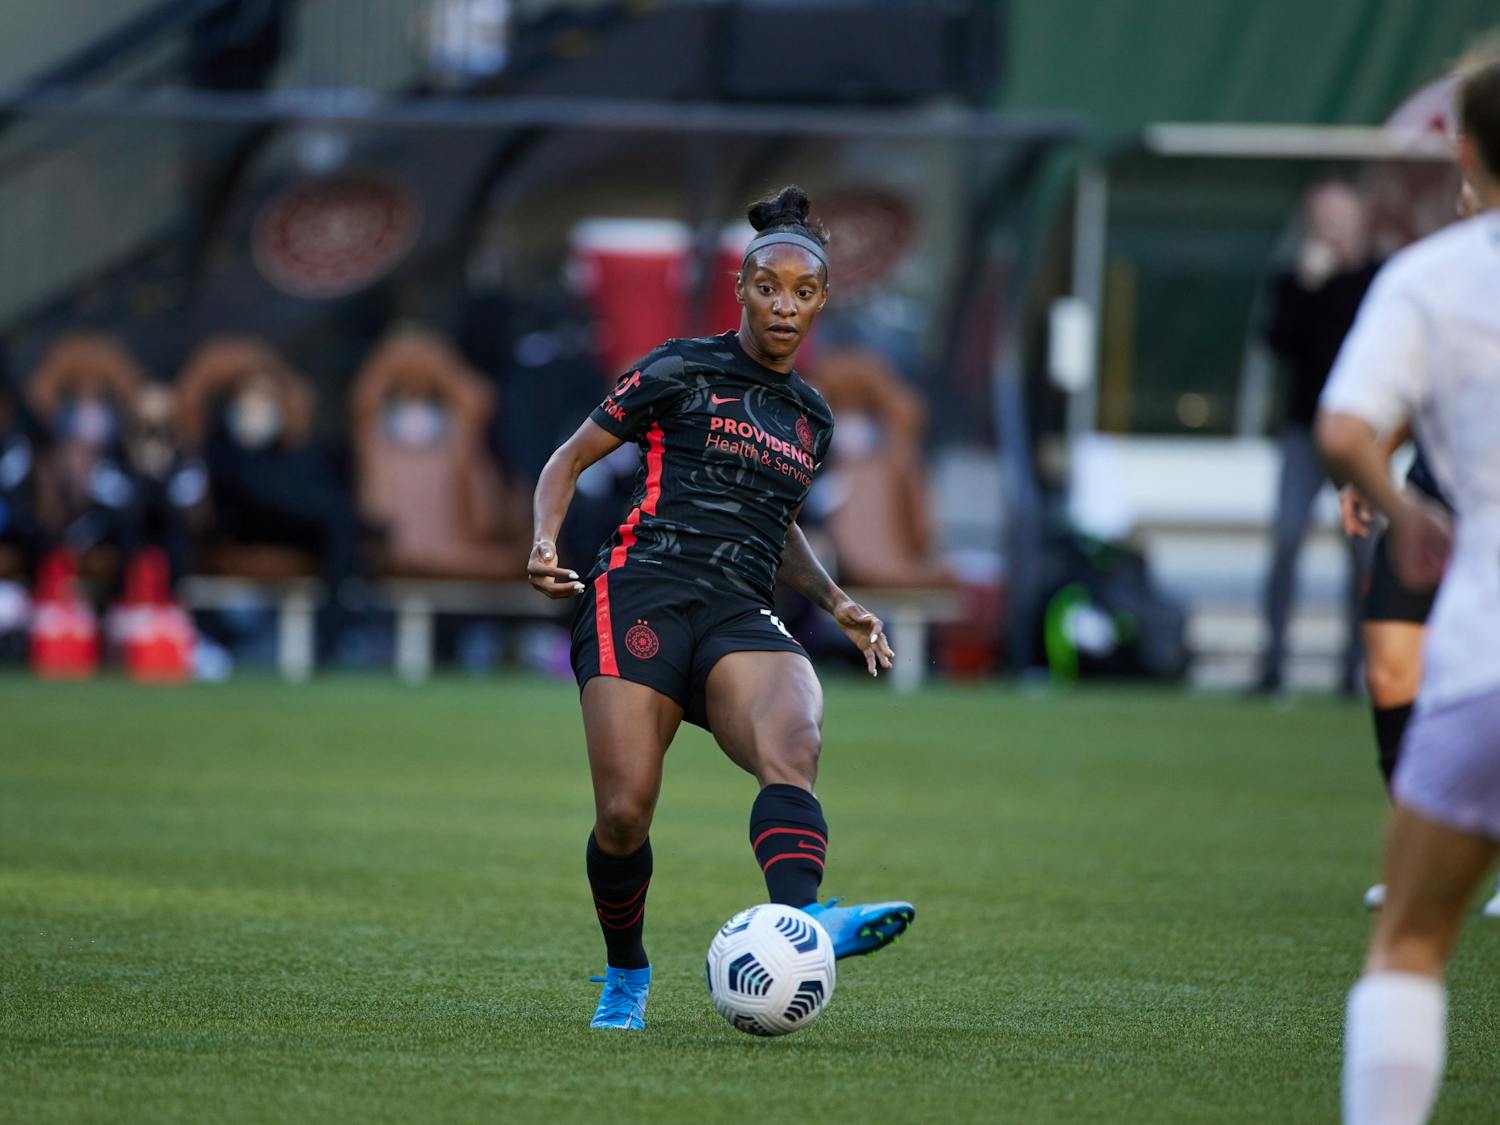 Crystal Dunn passes the ball during the Portland Thorns' game against Racing Louisville at Providence Park in Portland, OR on June 5, 2021. Photo by Craig Mitchelldyer/Portland Thorns FC